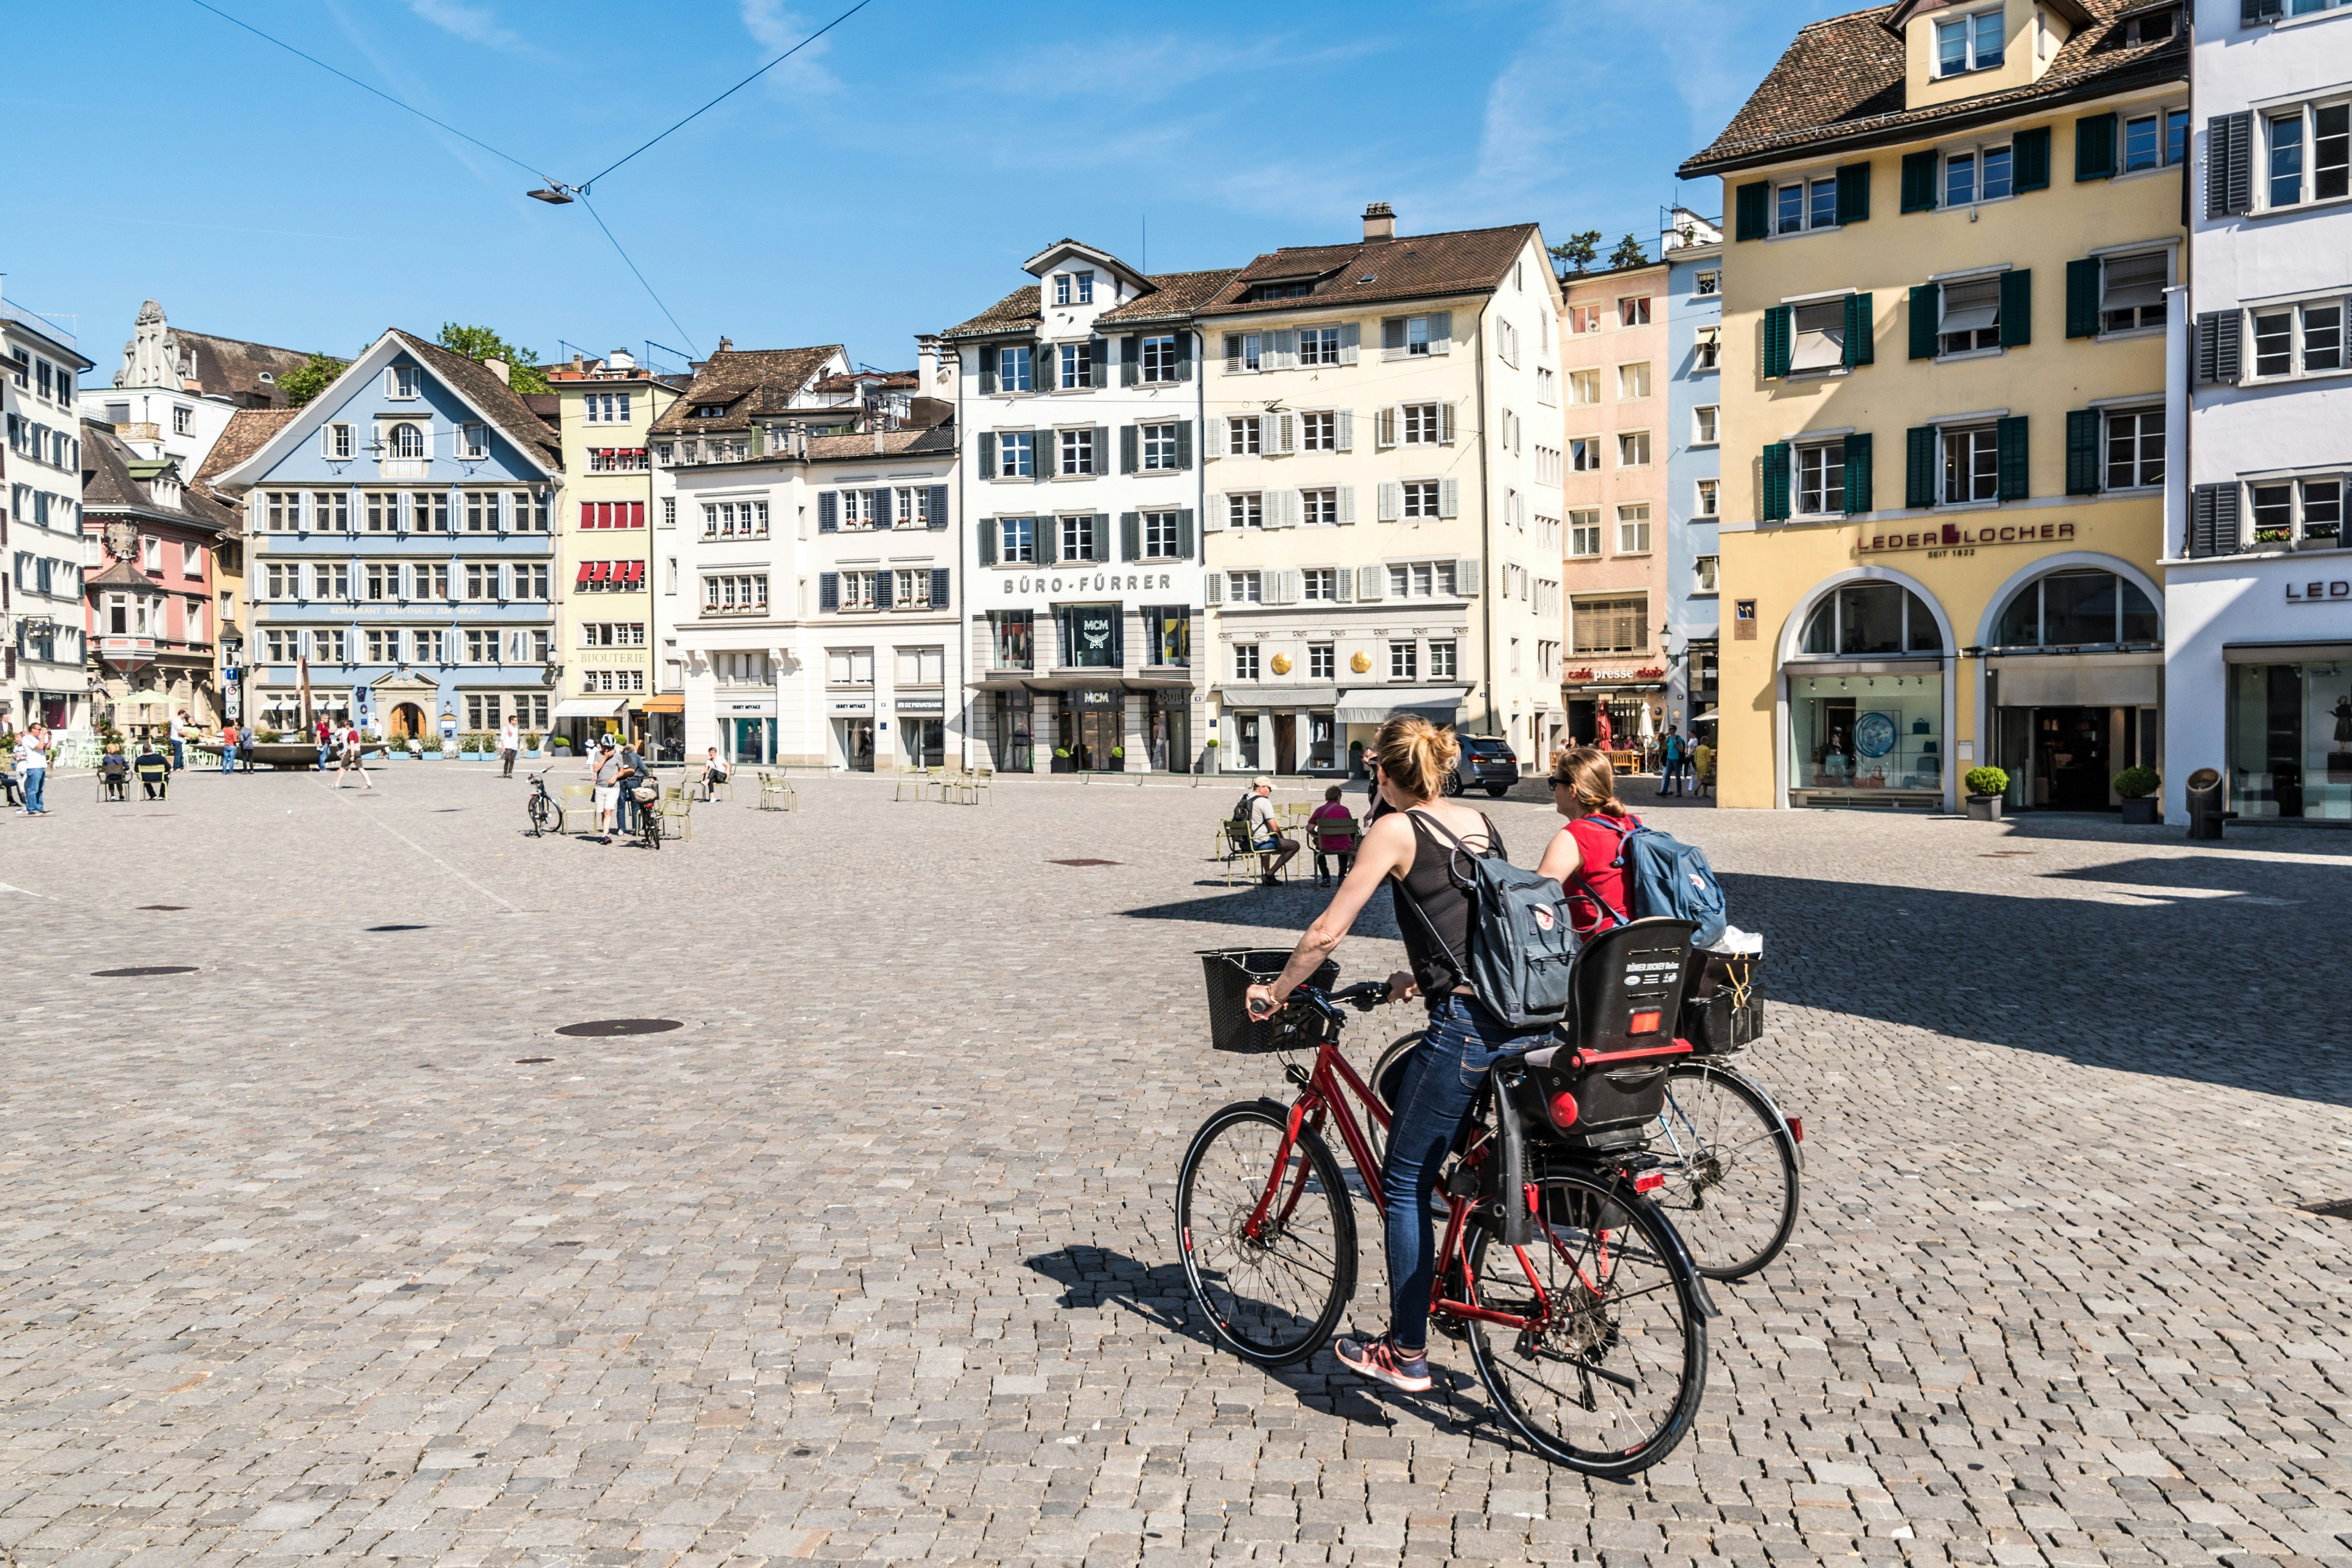 Two yound ladies ride bicycles through a town square in Zurich, the capital of Switzerland. Other people walk along the paths passing shops.
693239720